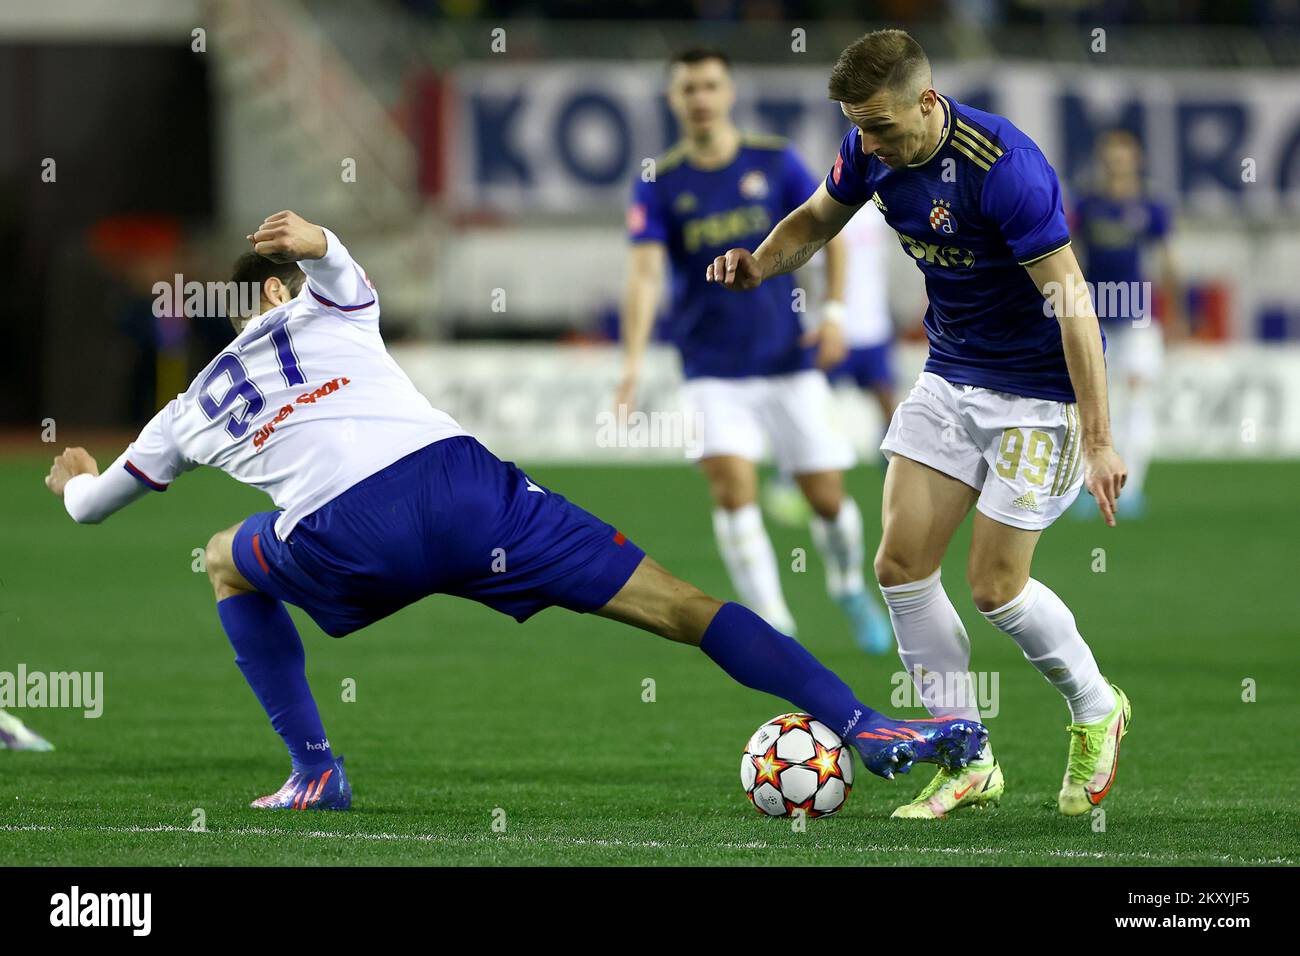 Bruno Petkovic of Dinamo Zagreb during the HT First League match between  HNK Hajduk Split and GNK Dinamo Zagreb at the Poljud Stadium on March 12,  2022 in Split, Croatia. Photo: Miroslav